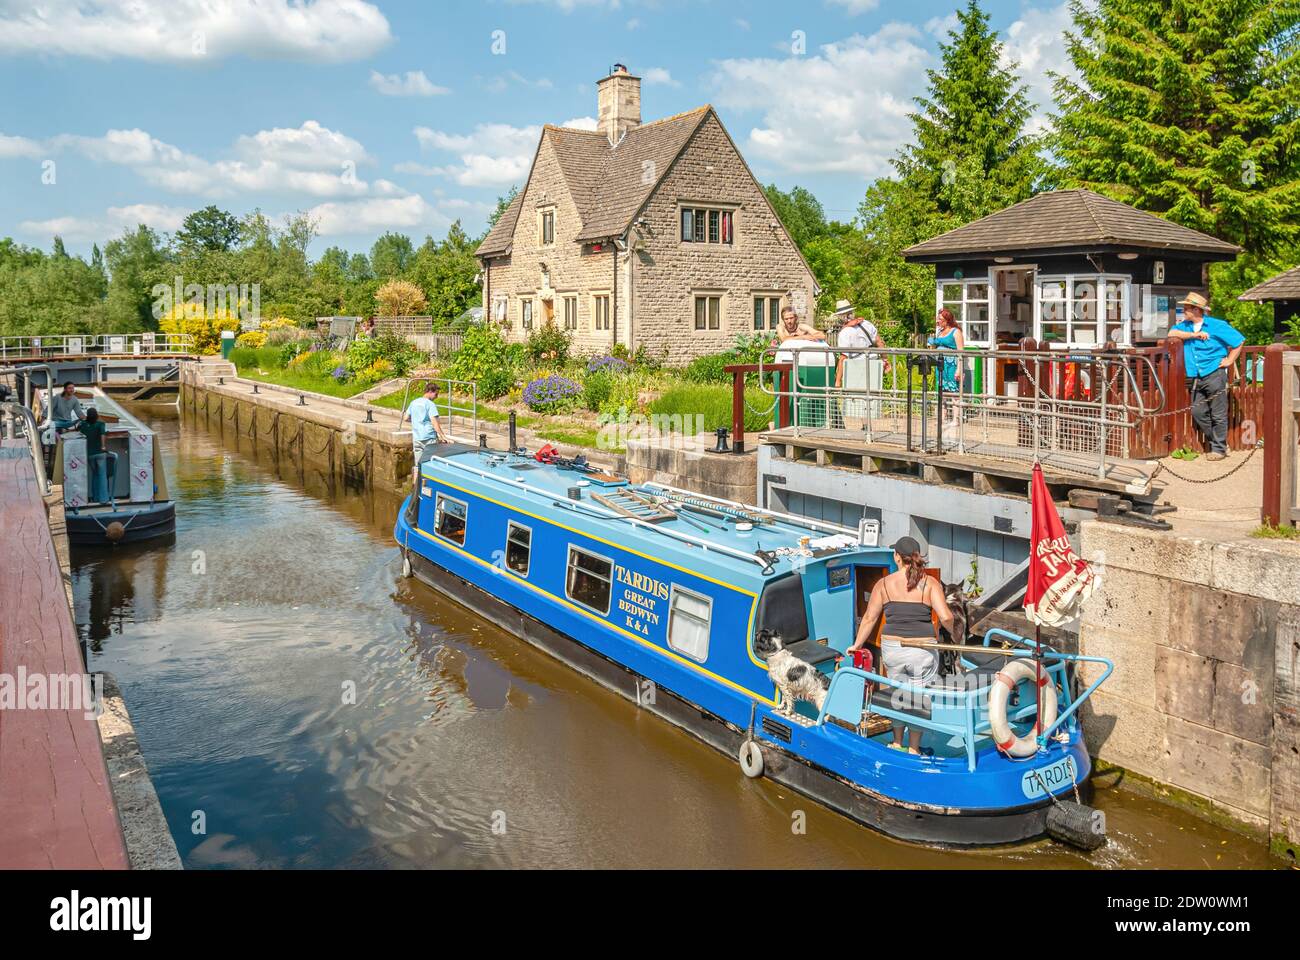 Narrowboat is passing Iffley Lock on River Thames near Oxford, Oxfordshire, England Stock Photo